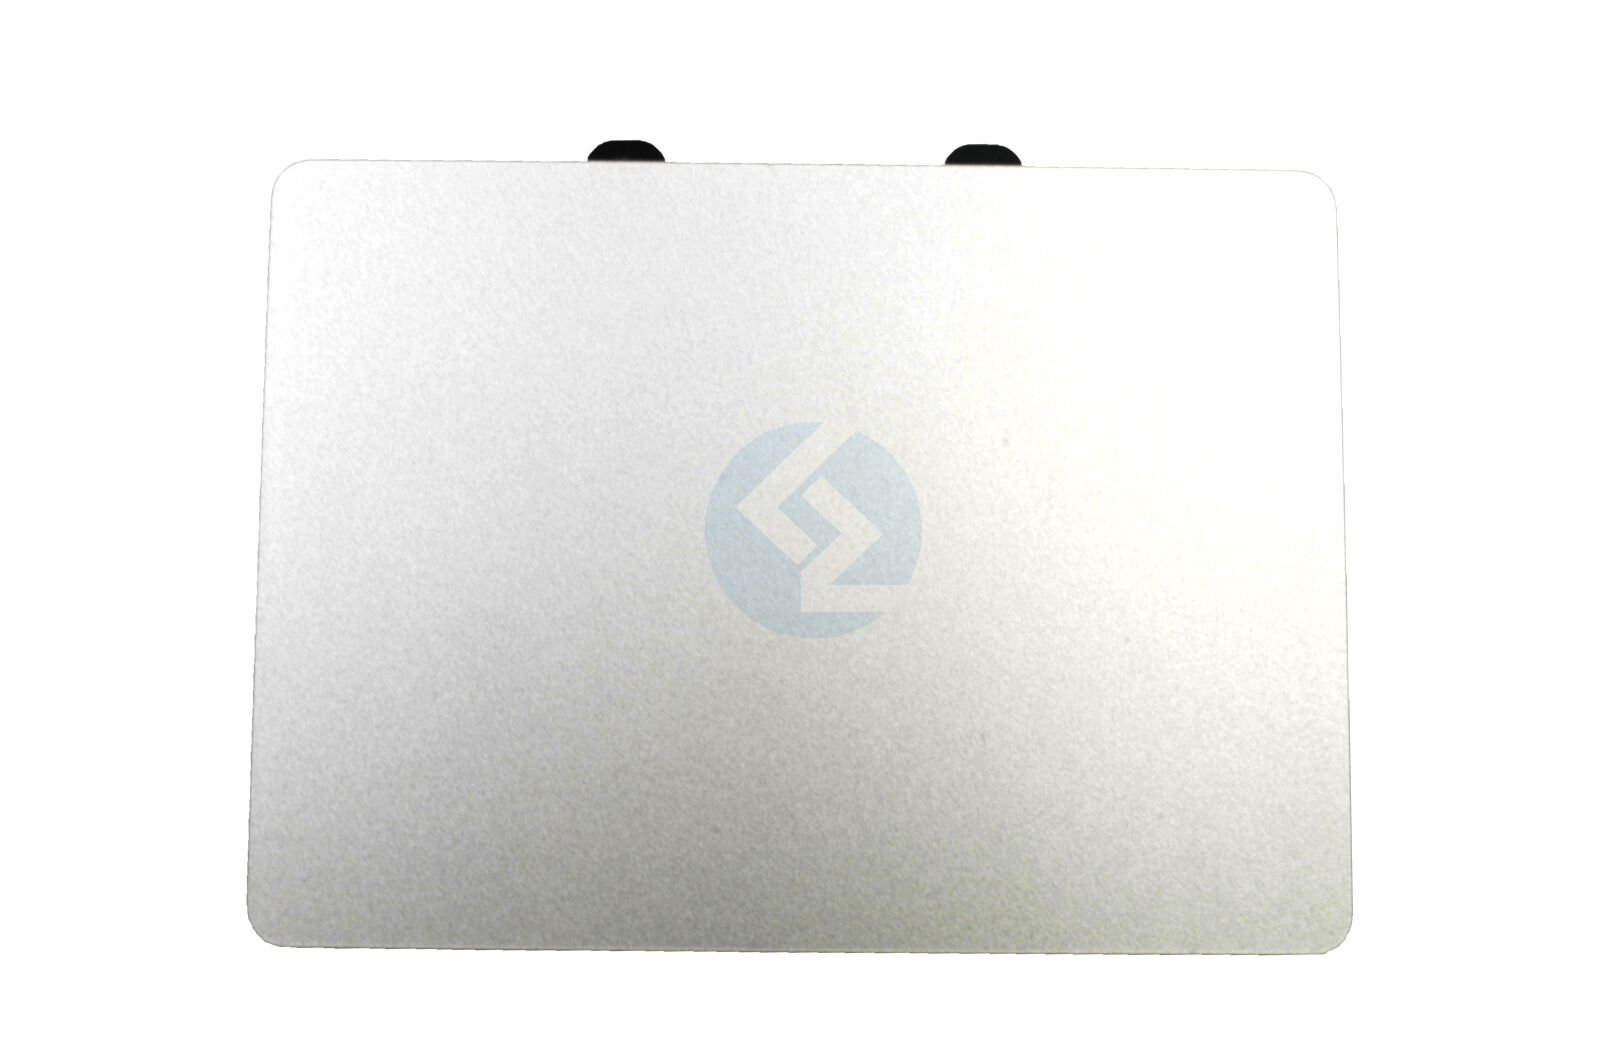 NEW Trackpad Touchpad Mouse without Cable for MacBook Pro 13